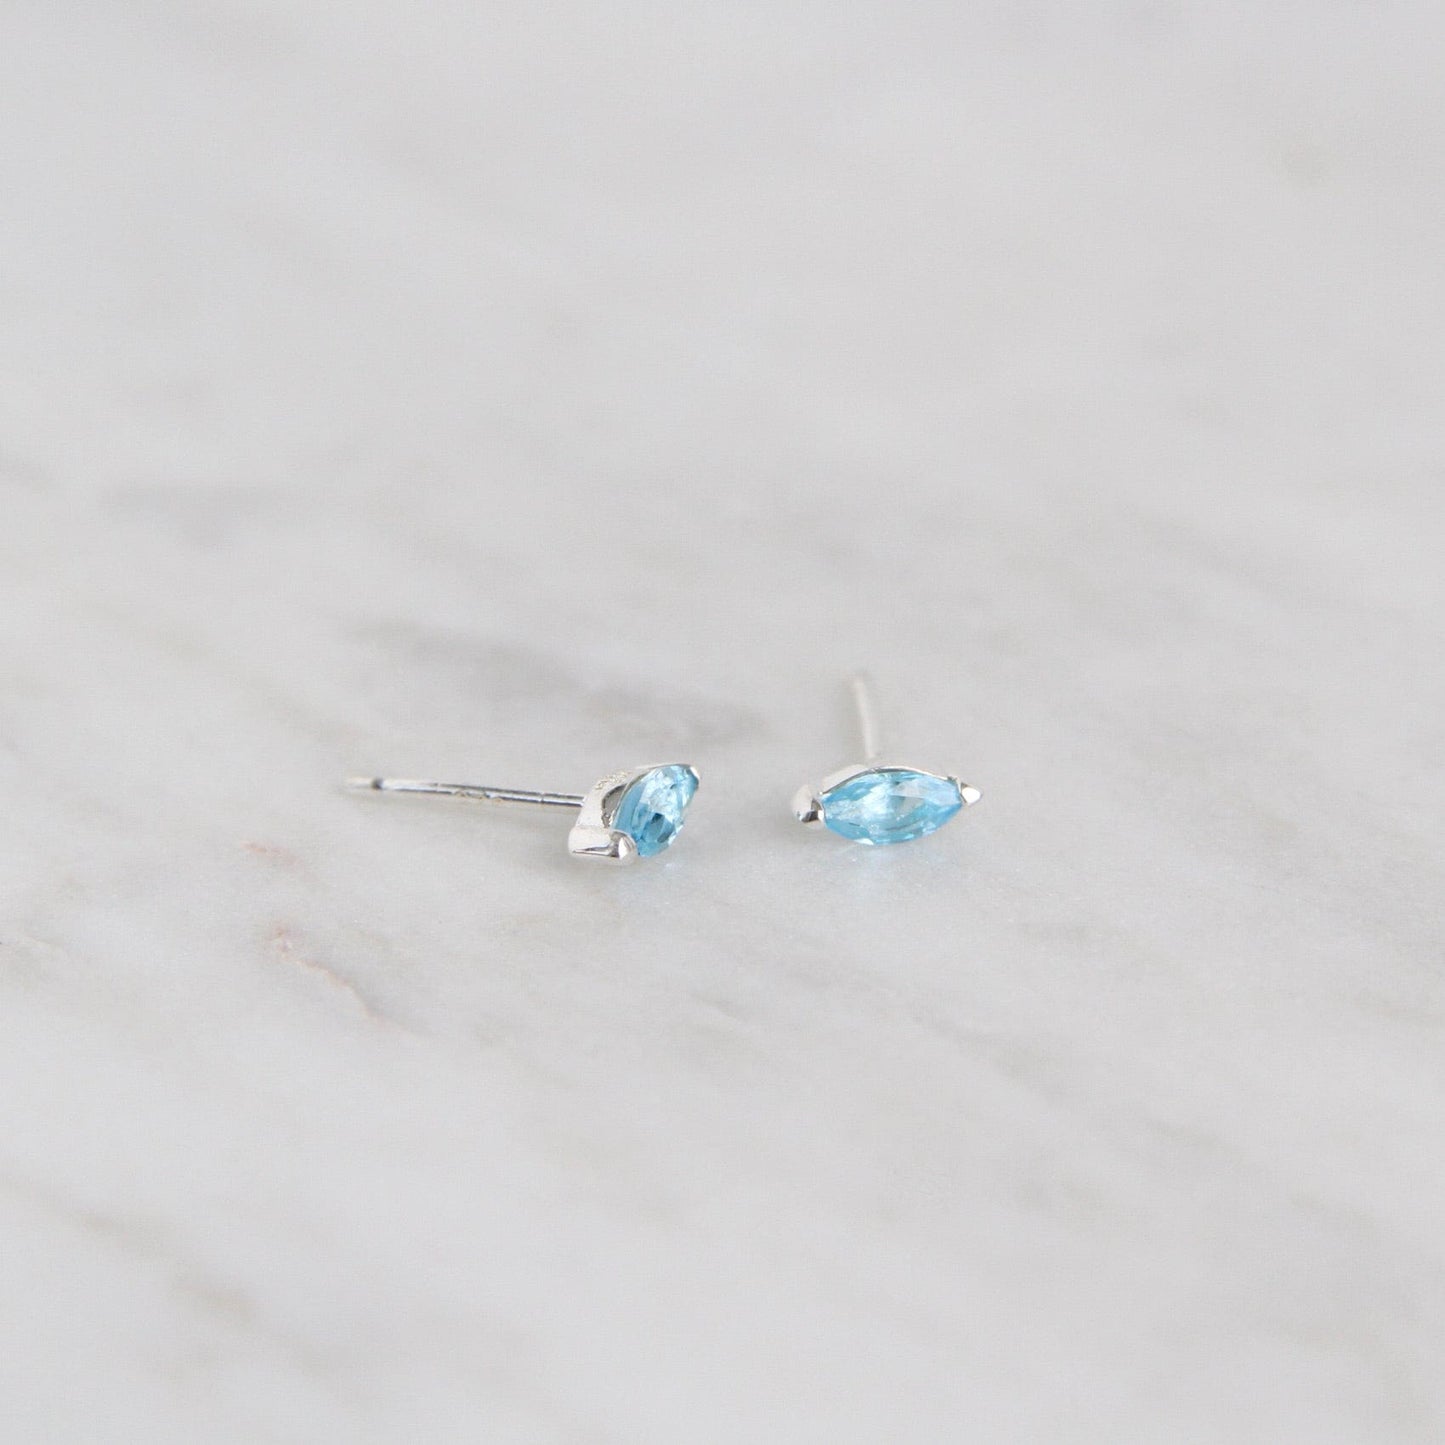 EAR Sterling Silver Blue Topaz Marquise Stud